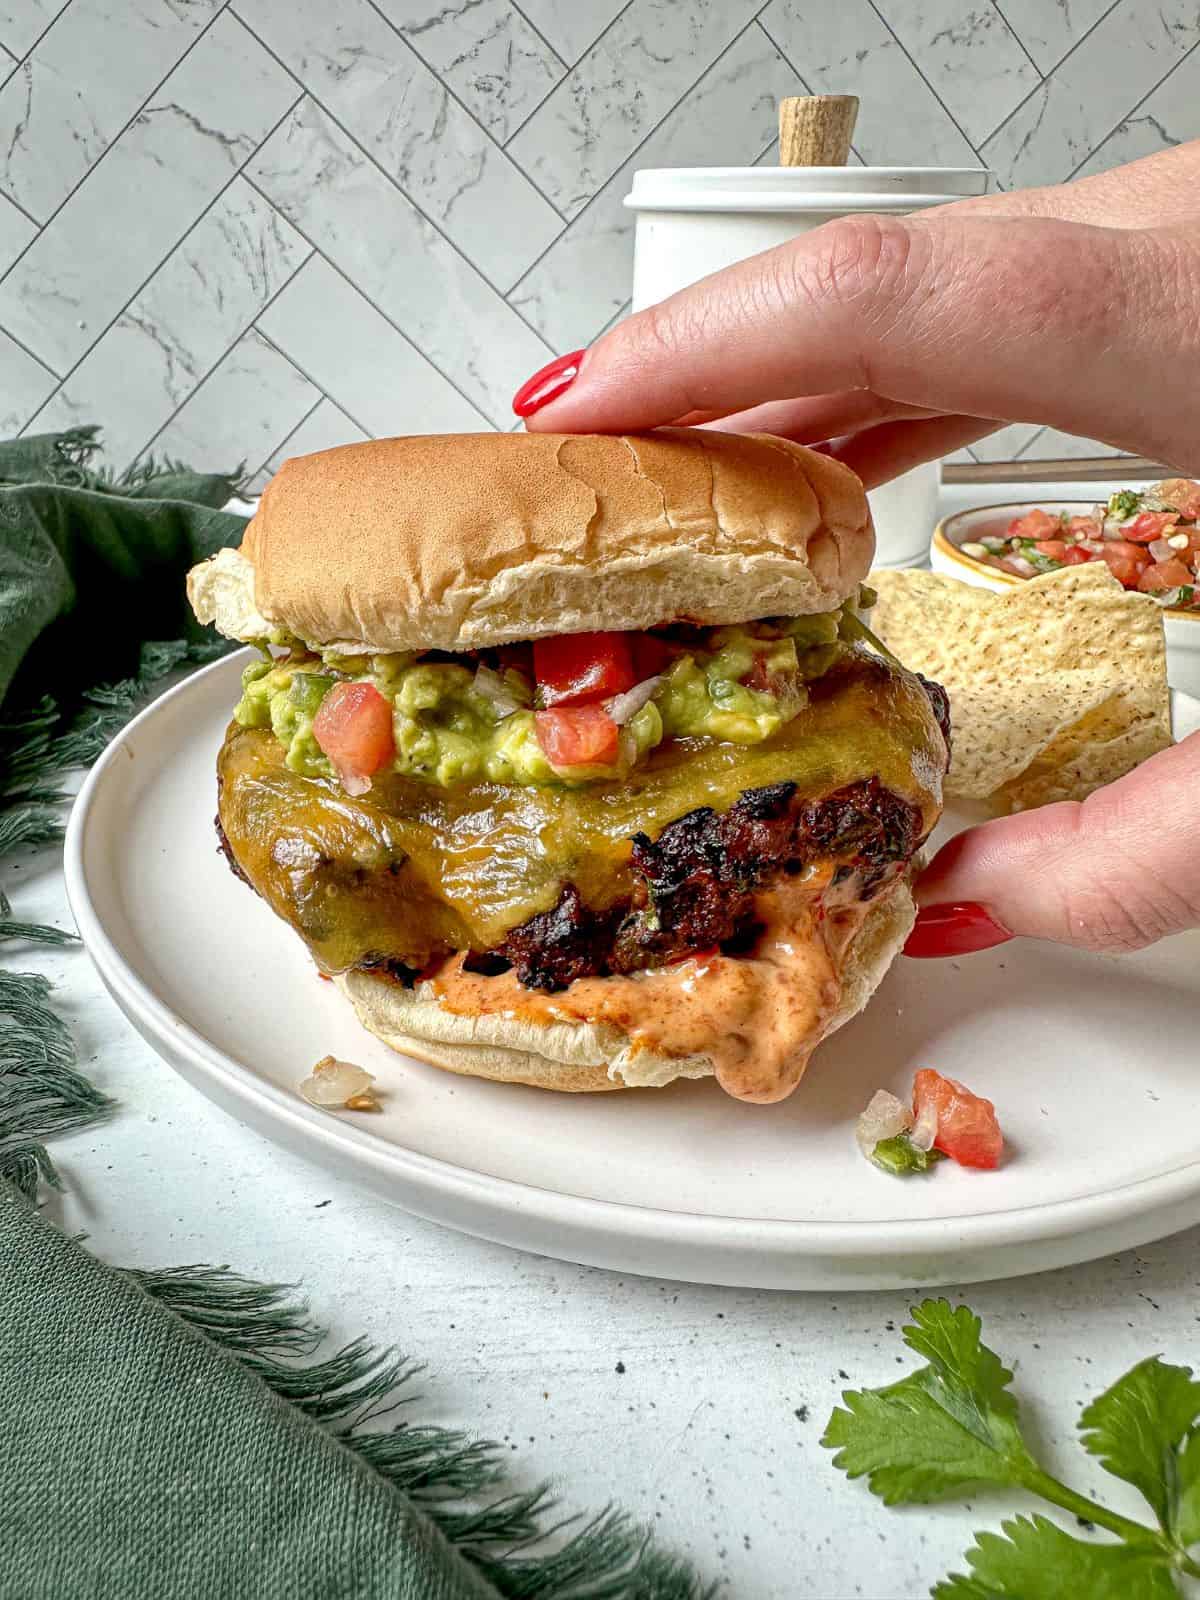 A hand with red nails is grabbing a taco burger topped with guacamole, pico de gallo, and spicy mayo dipping out from the bottom bun.